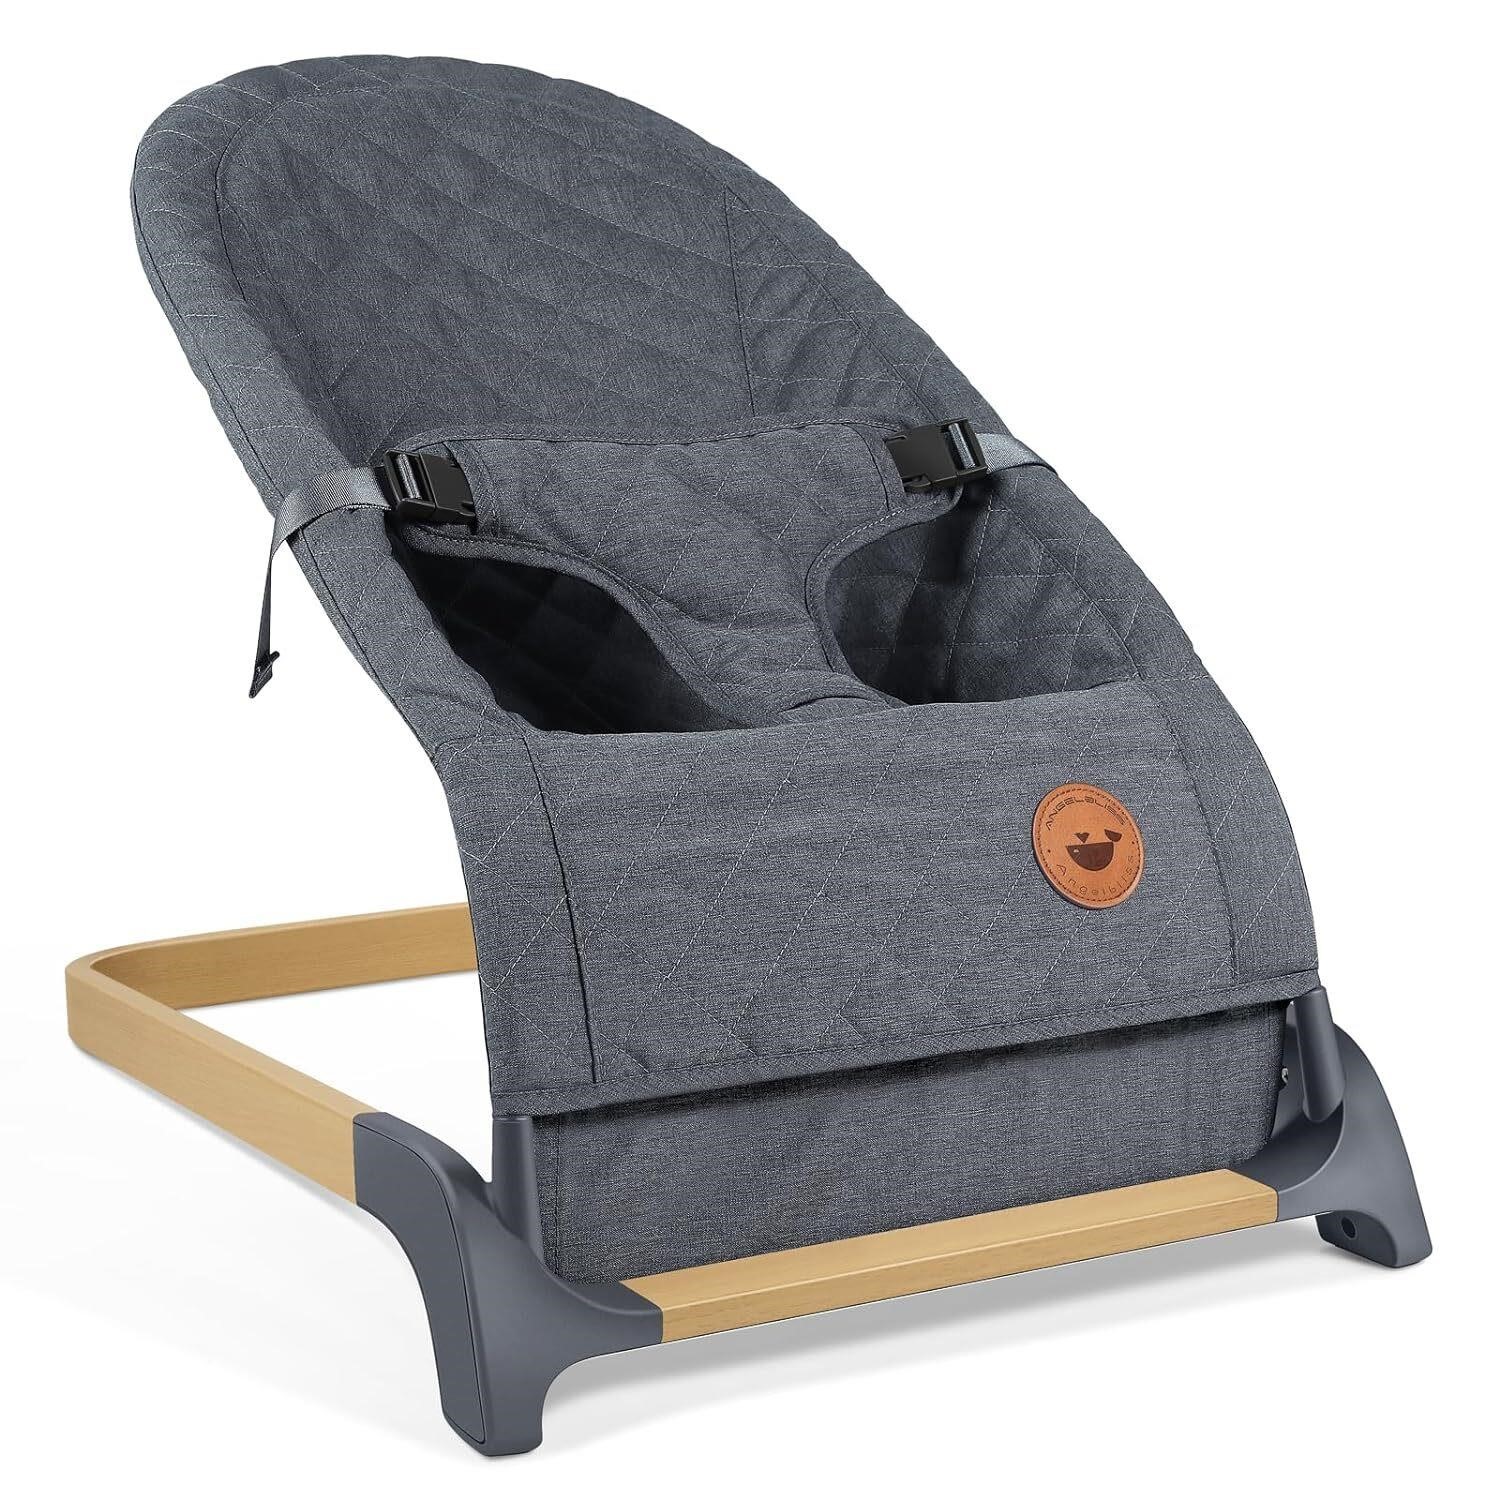 ANGELBLISS Baby Bouncer (Grey)  Portable  Wood.